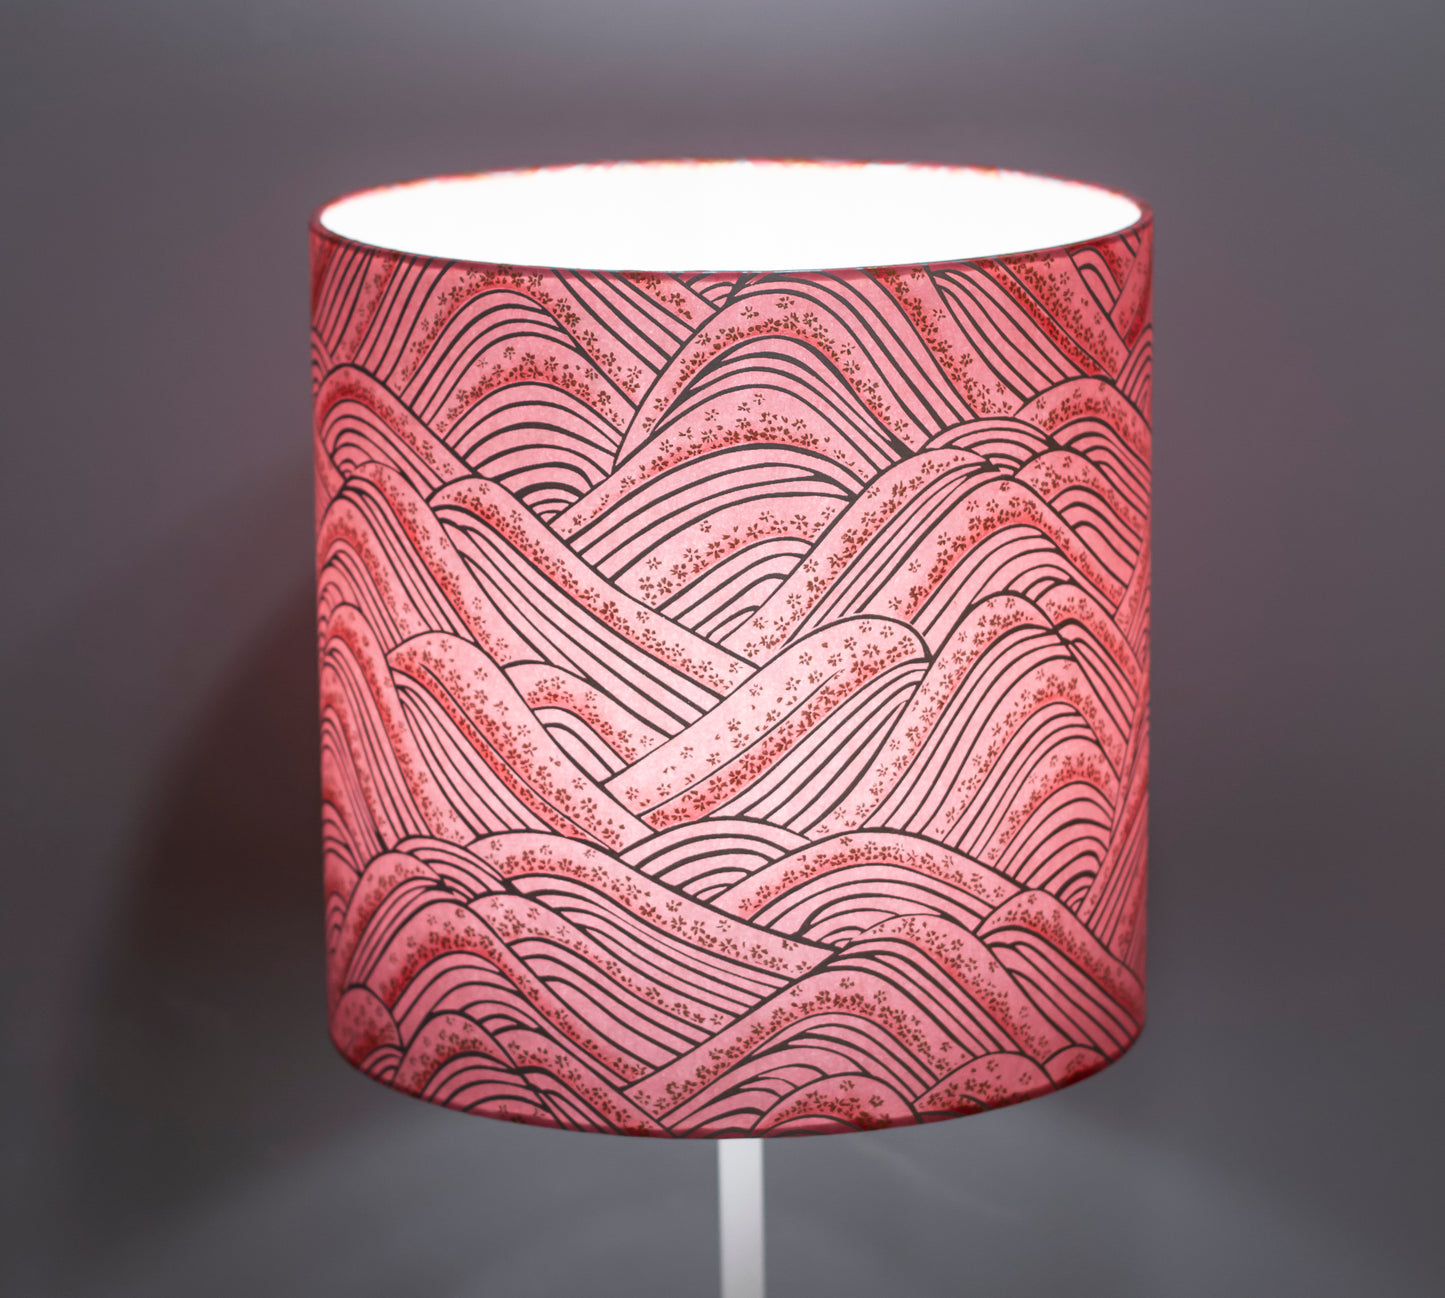 Rectangle Lamp Shade - W04 ~ Pink Hills with Gold Flowers, 50cm(w) x 25cm(h) x 25cm(d)